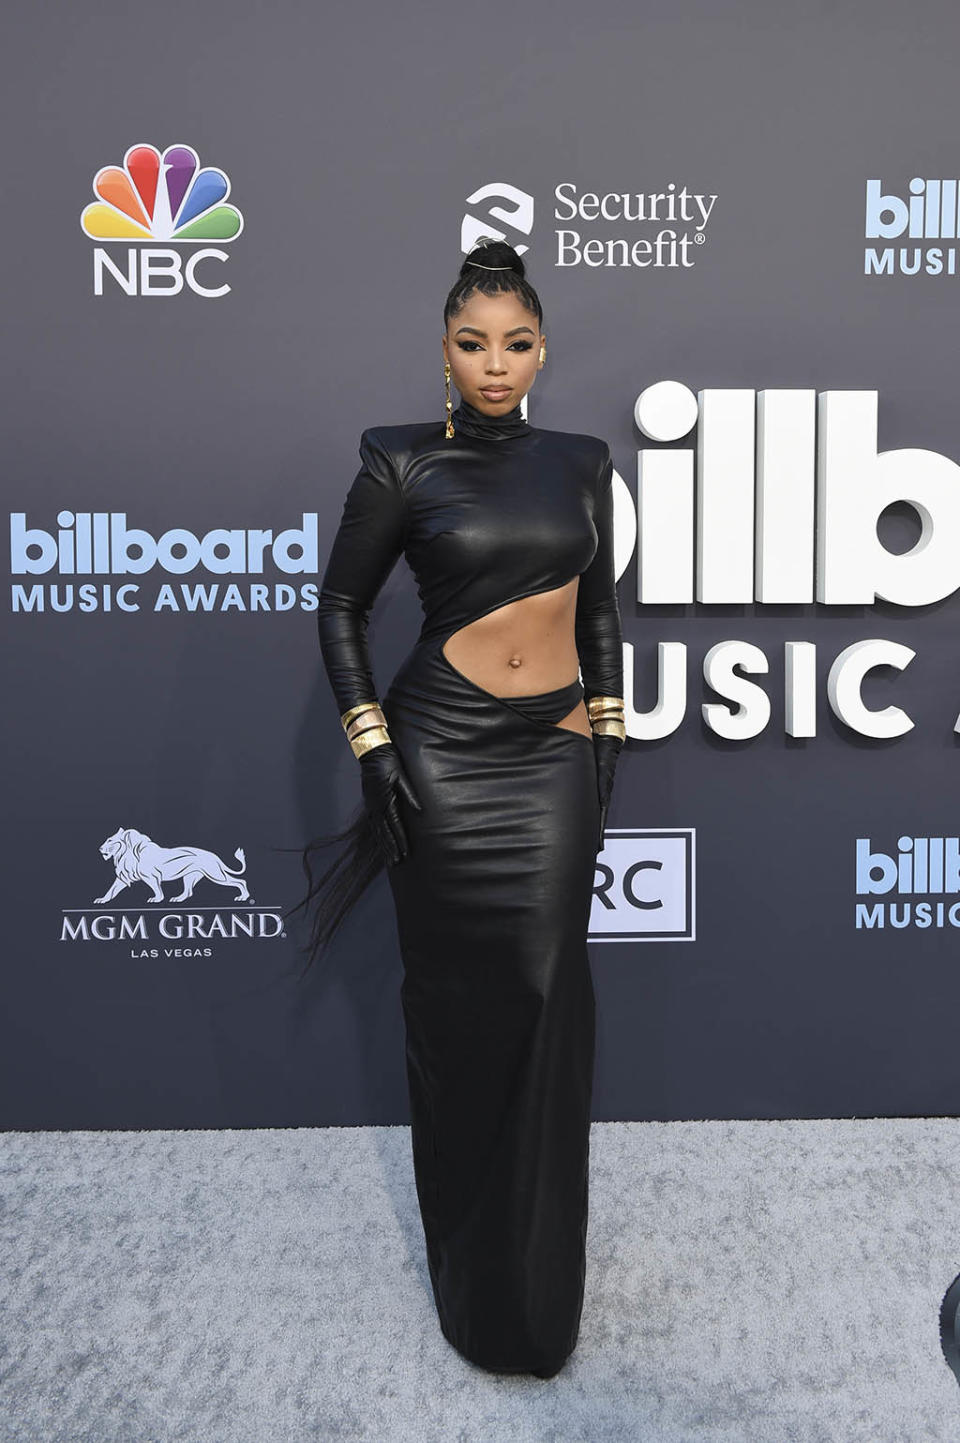 Chloe Bailey at the 2022 Billboard Music Awards held at the MGM Grand Garden Arena on May 15, 2022 in Las Vegas, Nevada. - Credit: Brenton Ho for Billboard